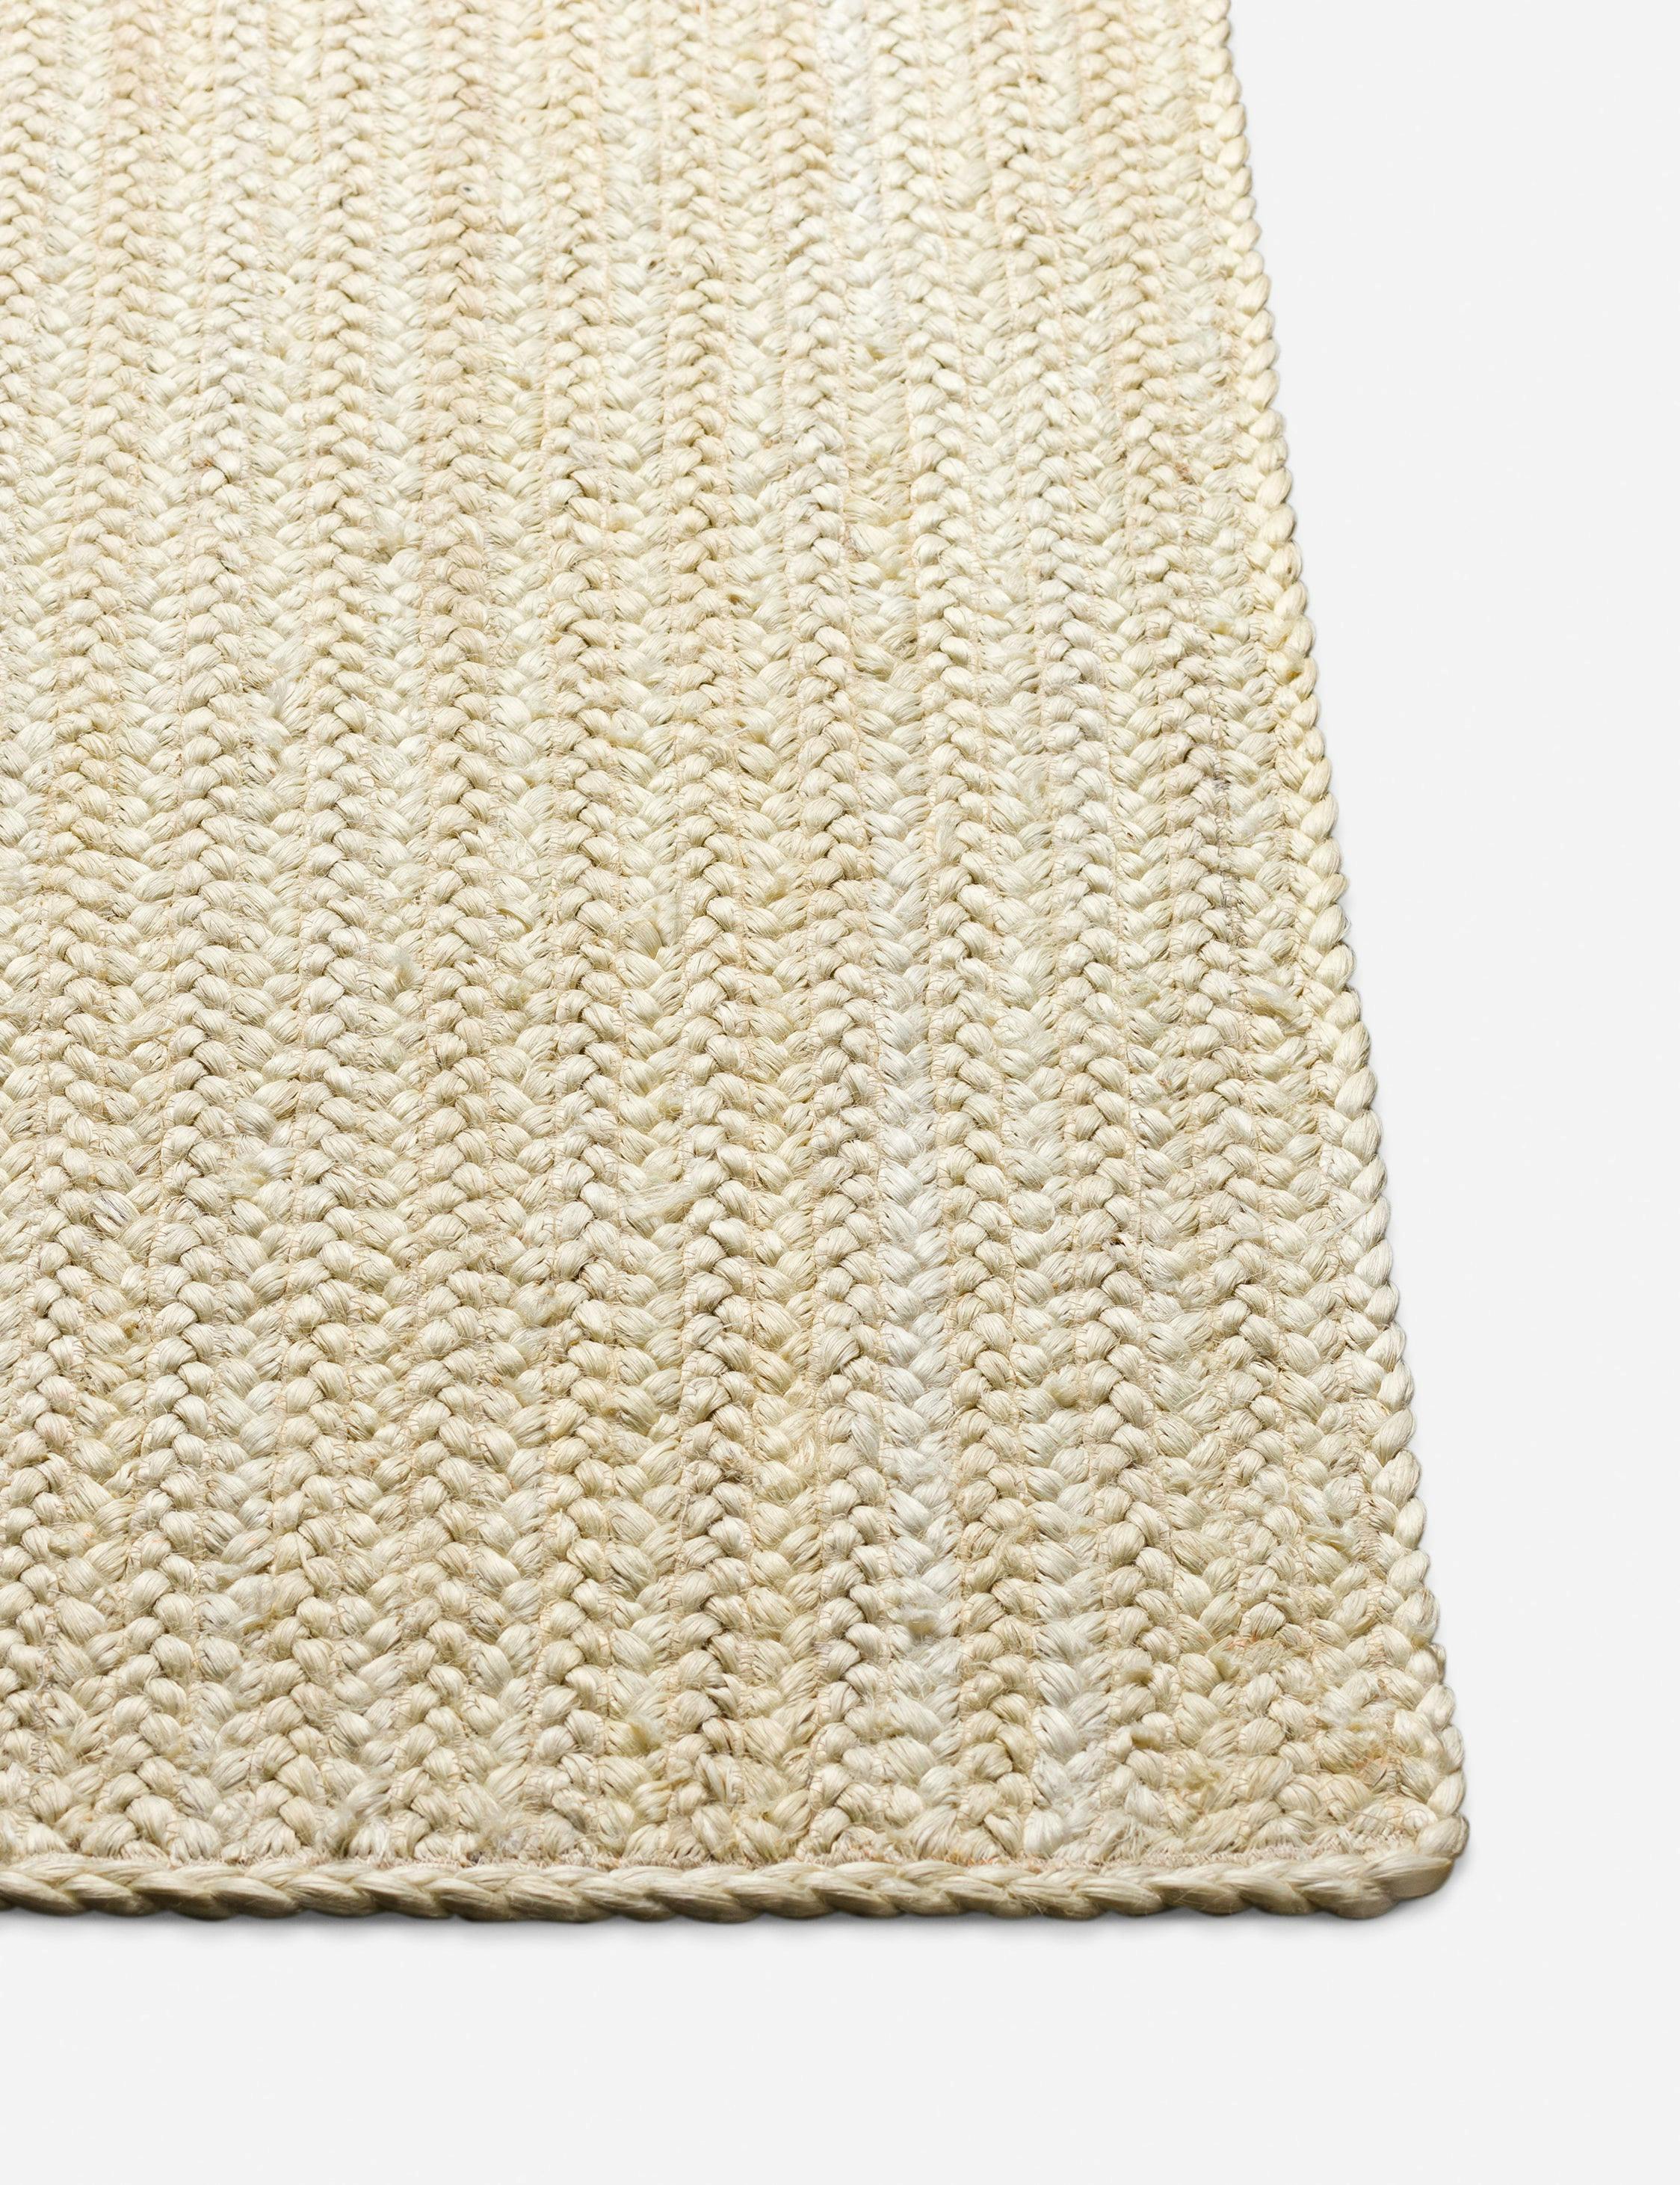 Ivory Handwoven Jute Accent Rug 2' x 3' - Easy Care and Washable